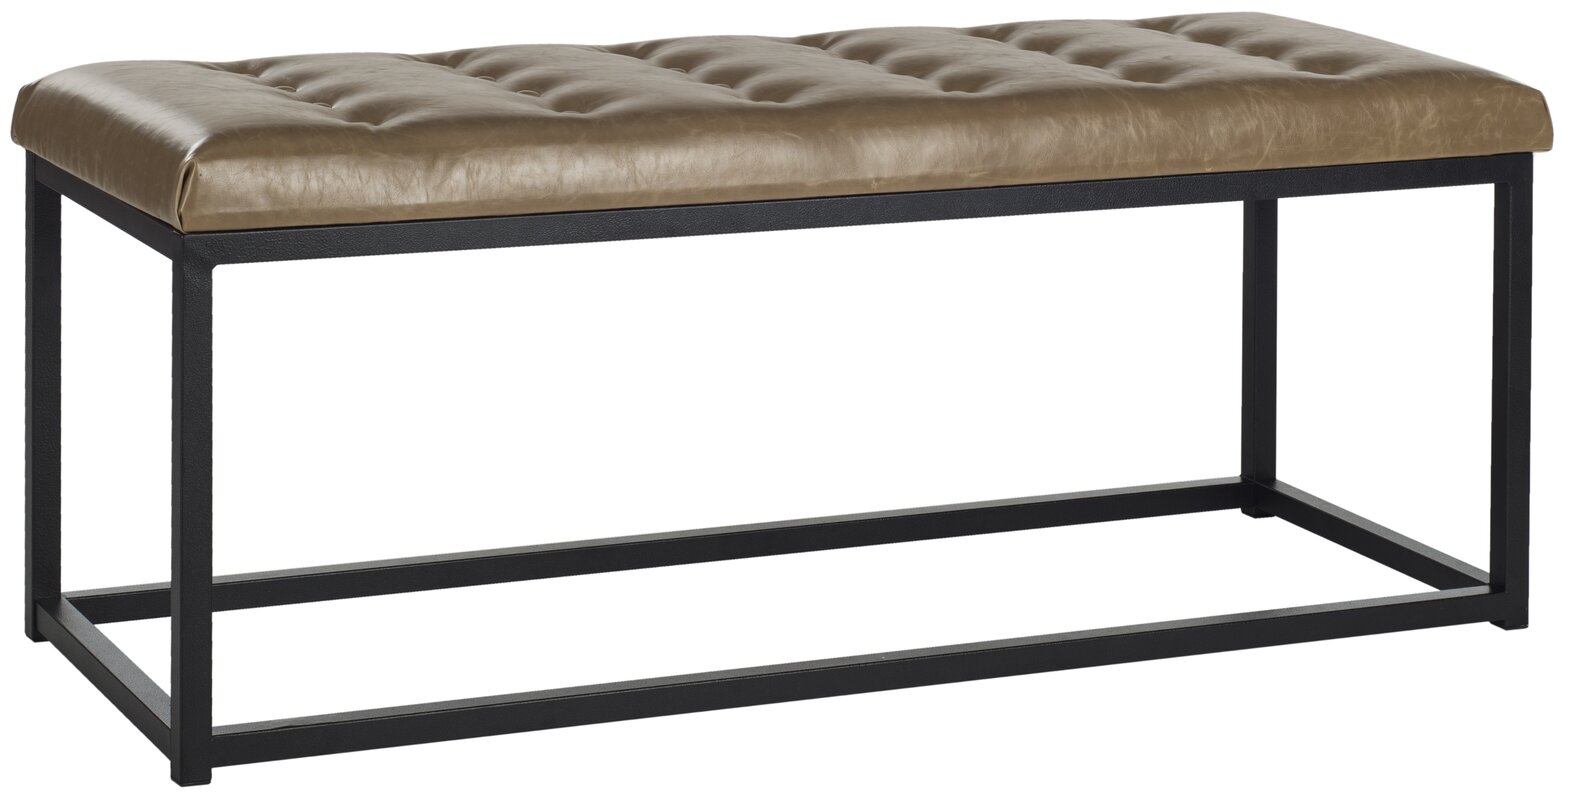 Landry Faux Leather Bench - Image 1